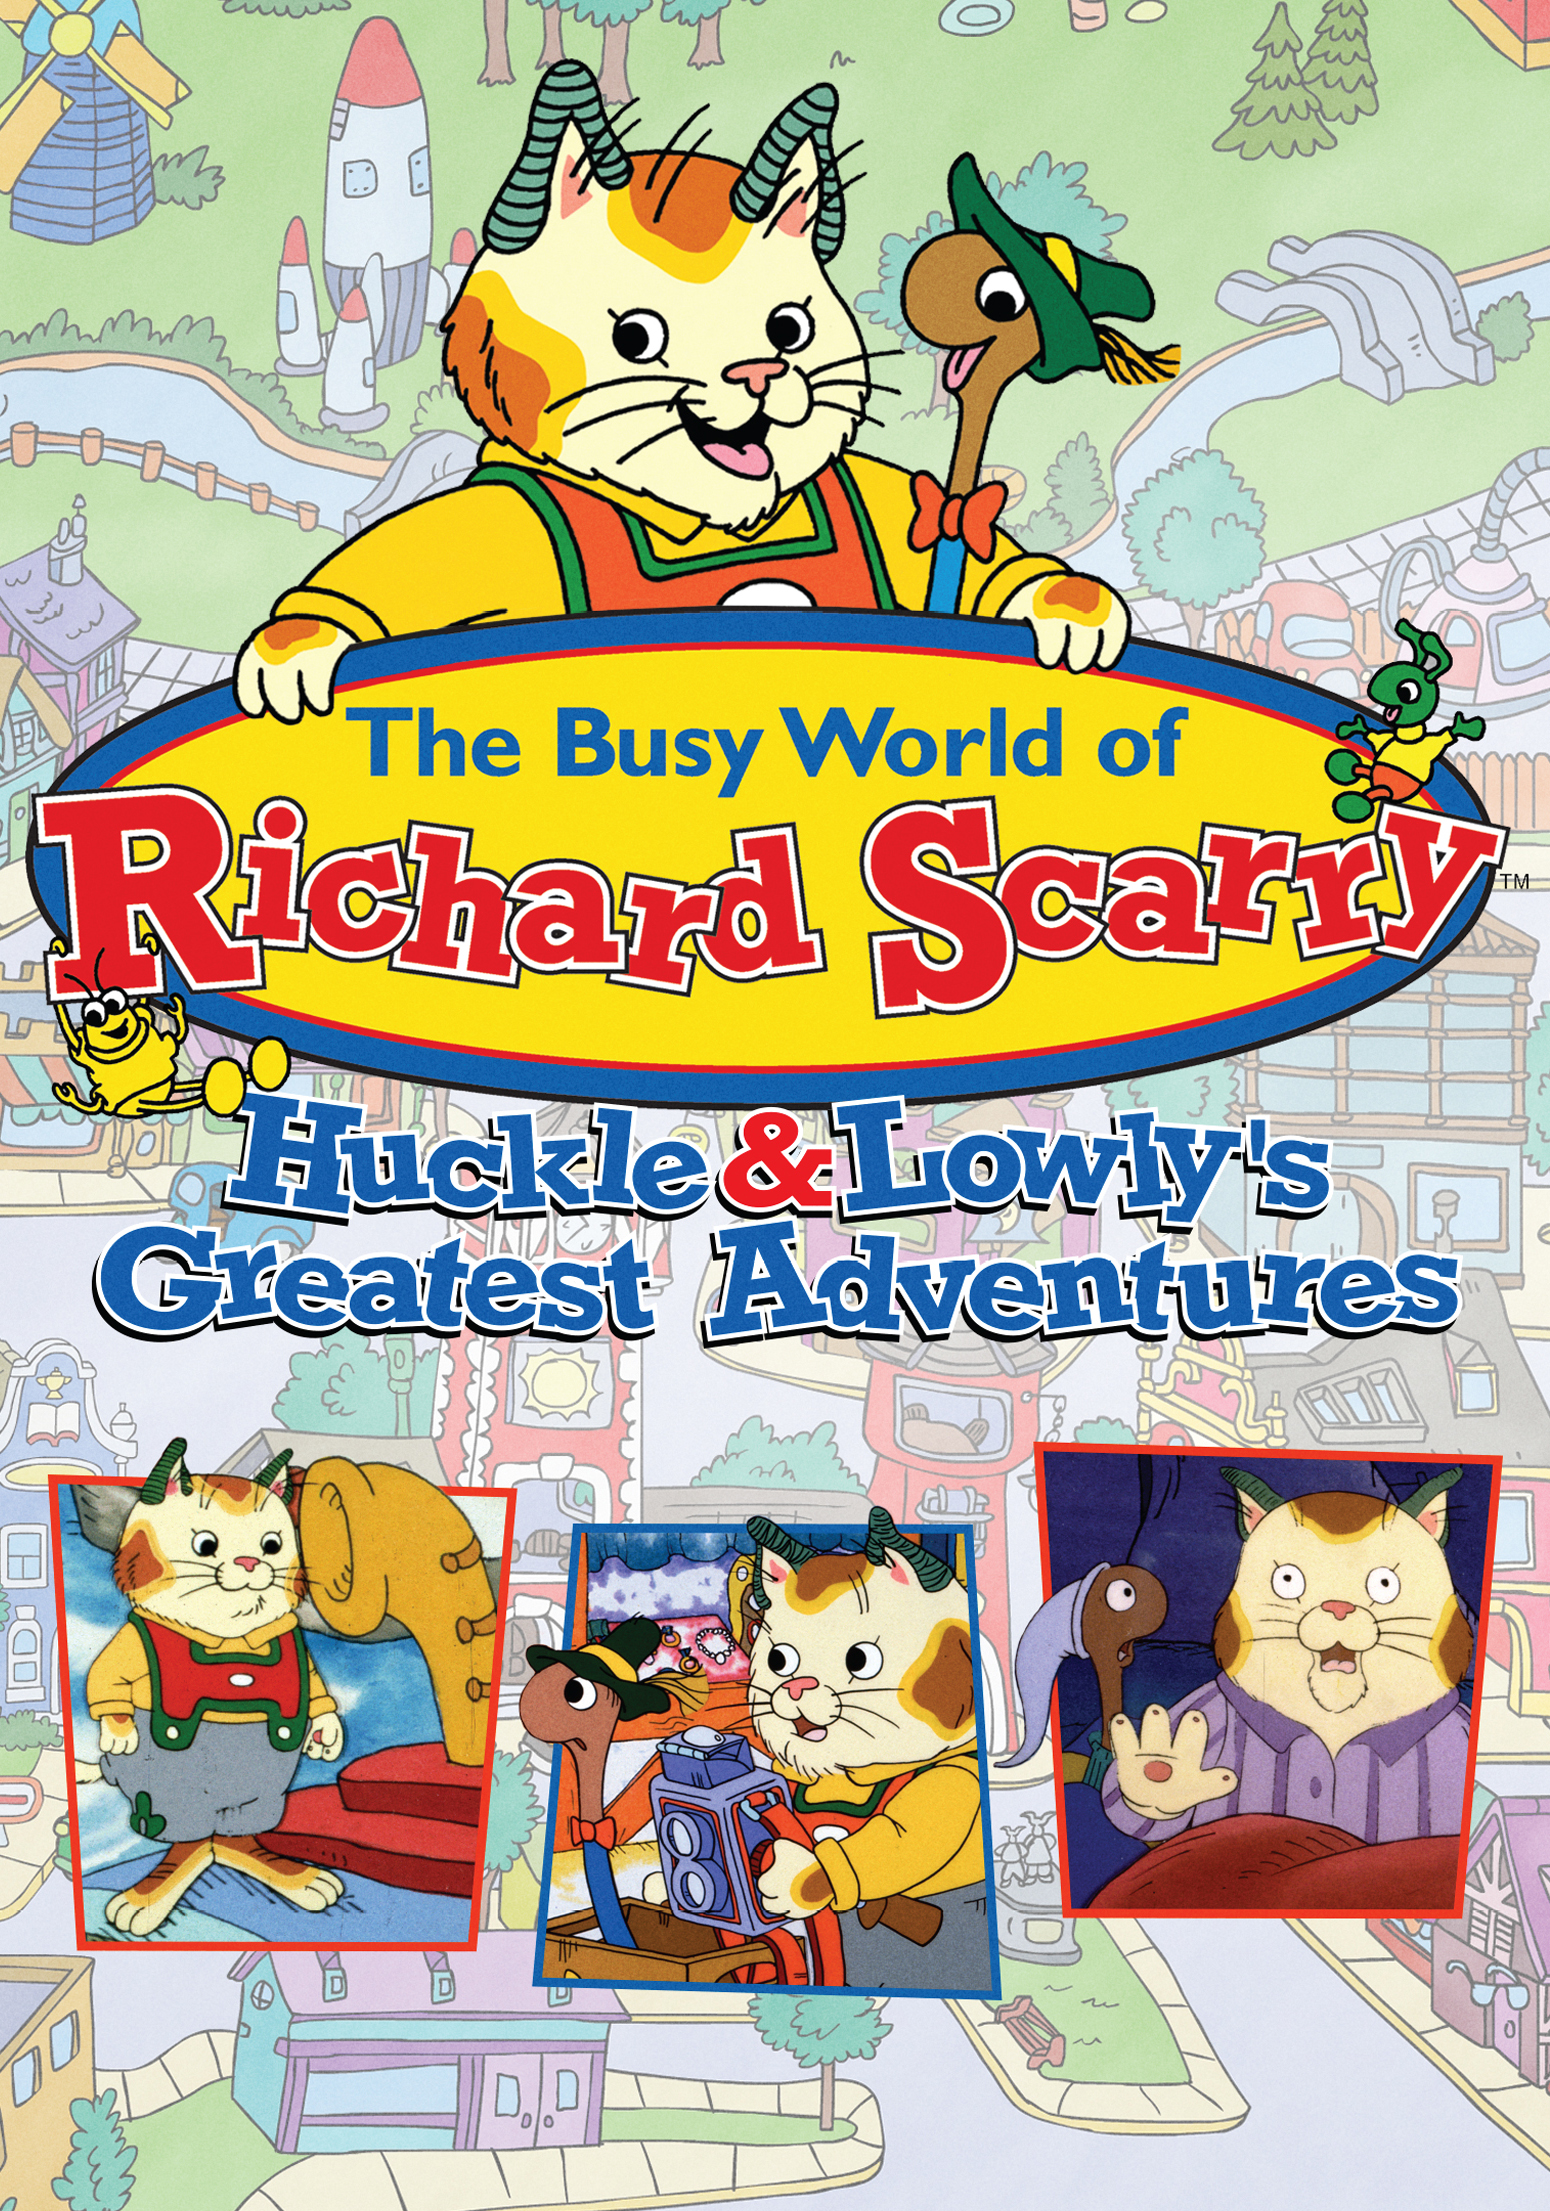 Best Buy: The Busy World of Richard Scarry: Huckle & Lowly's 